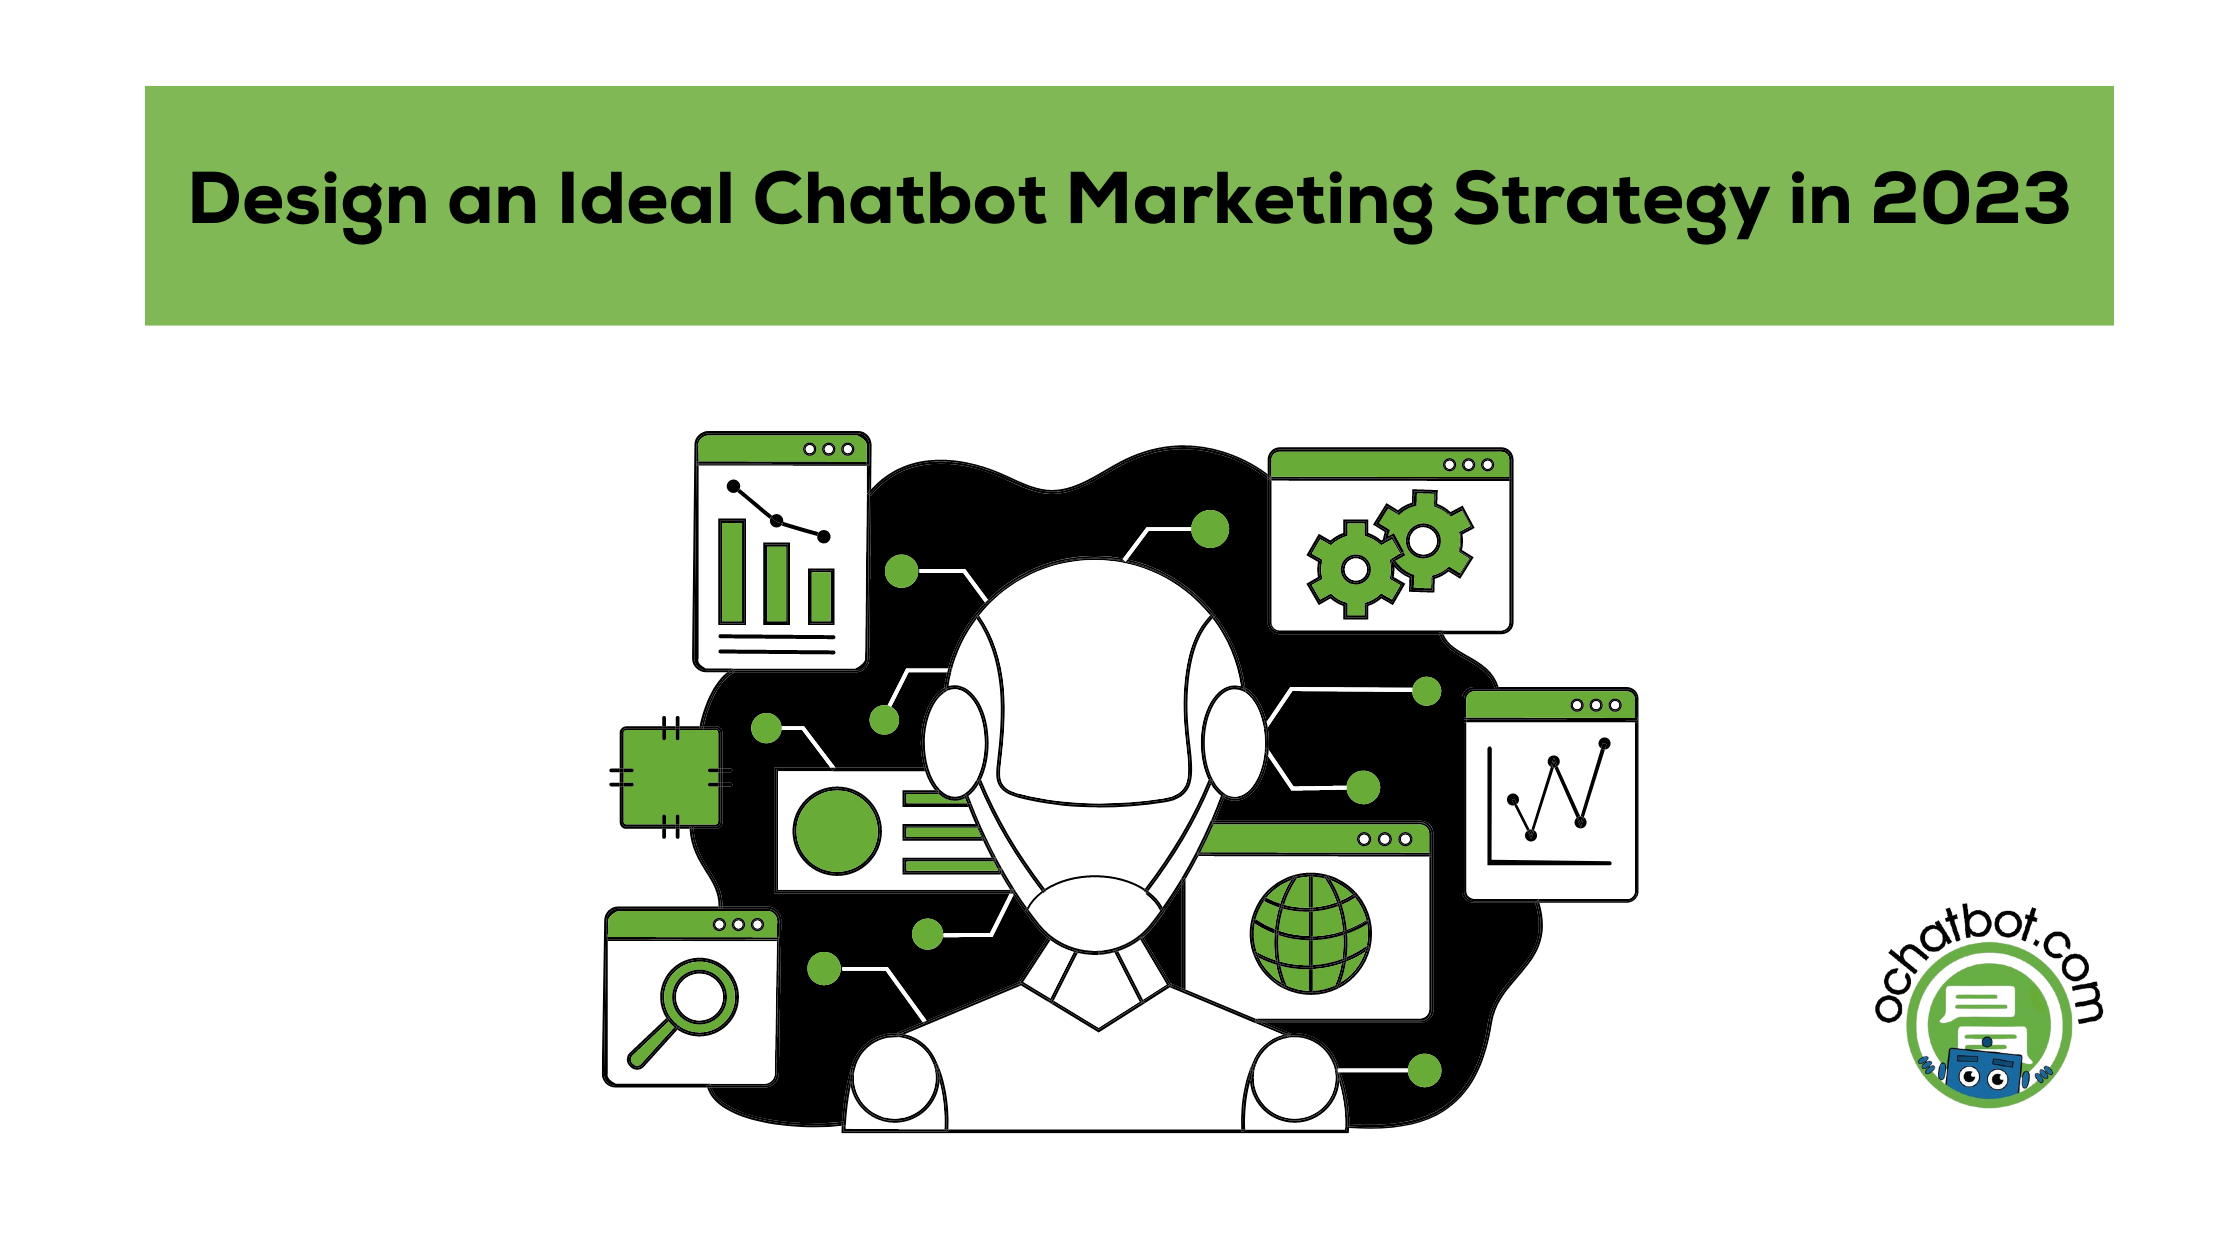 Design an Ideal Chatbot Marketing Strategy in 2023